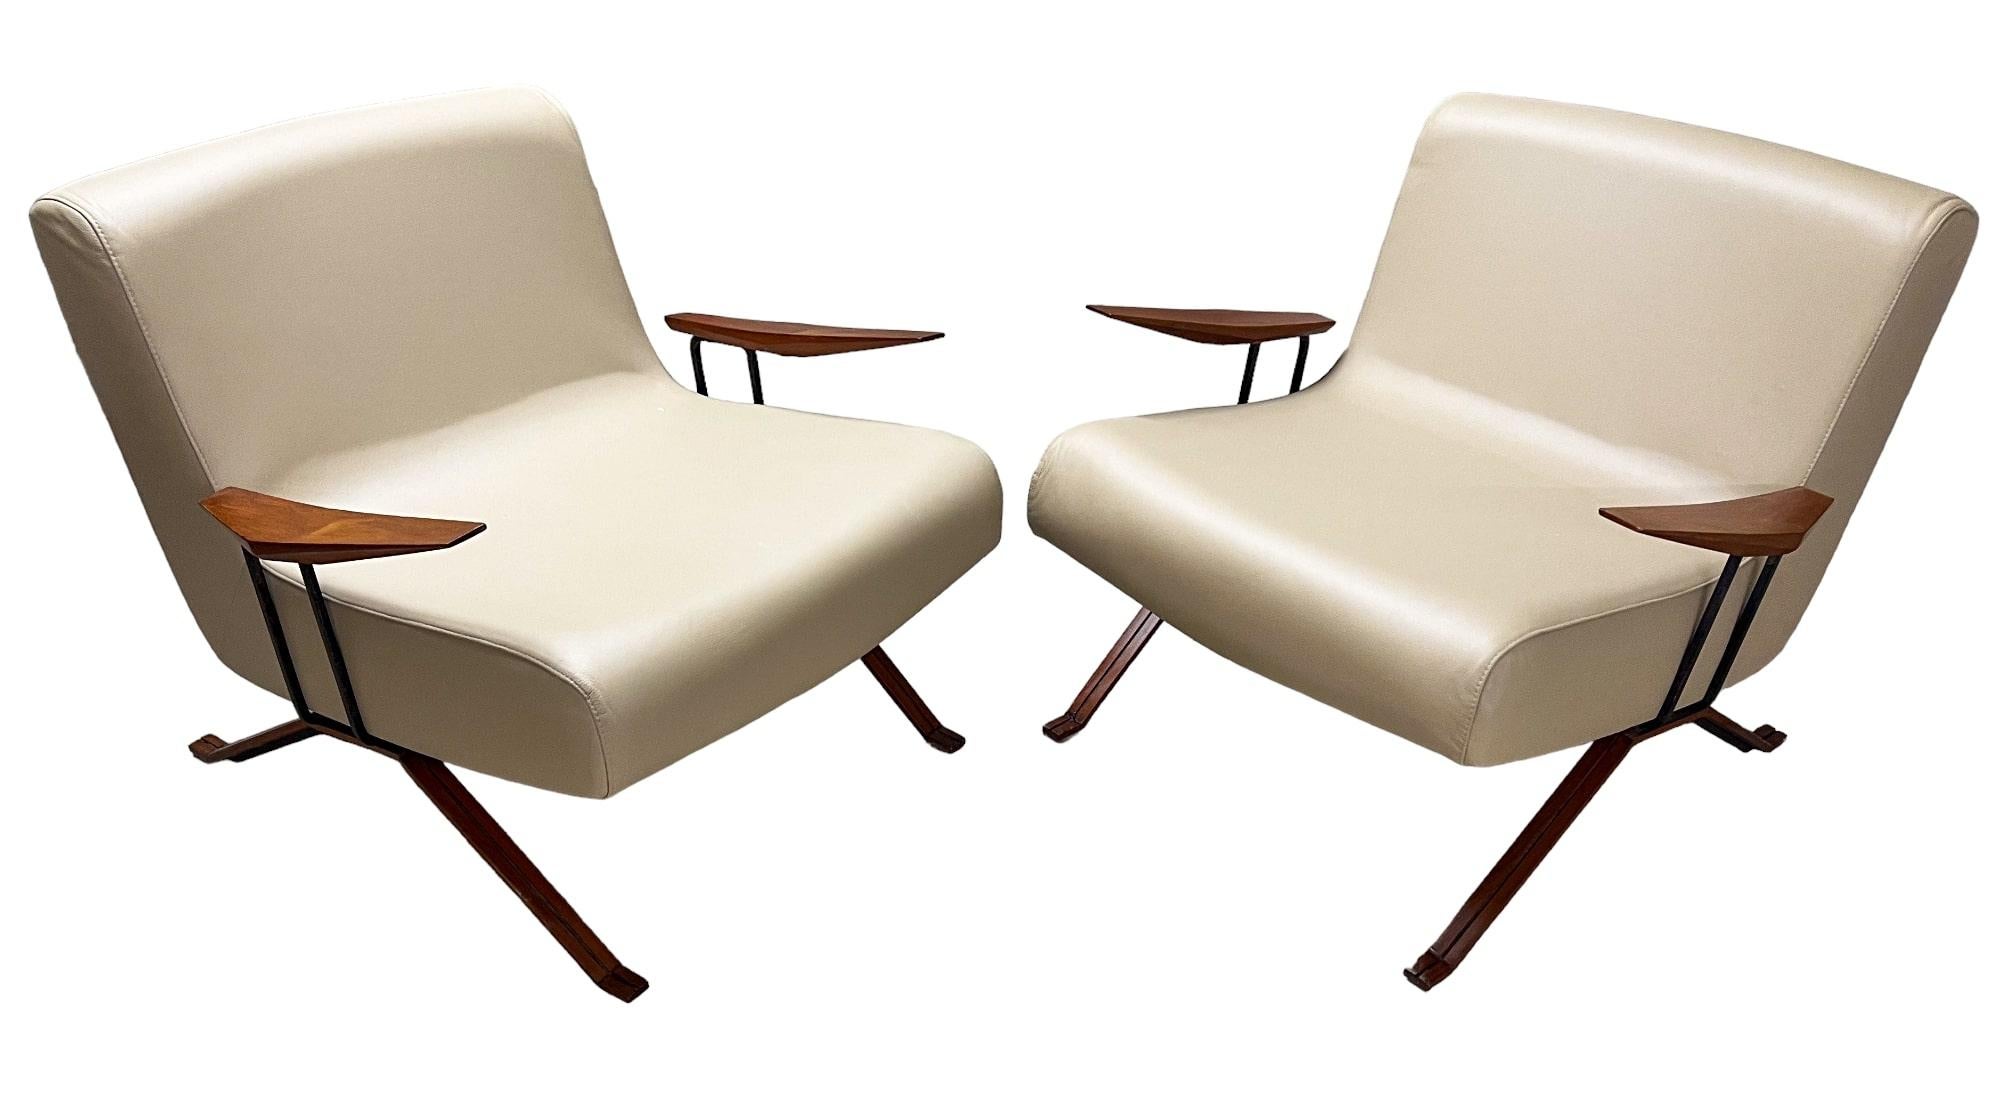 Available today, this set of 2 Brazilian modern armchairs, designed by Percival Lafer in 1963, is a beautiful piece of furniture. The chairs are made with Brazilian wood and an iron structure that holds the beige leather seat together. In addition,